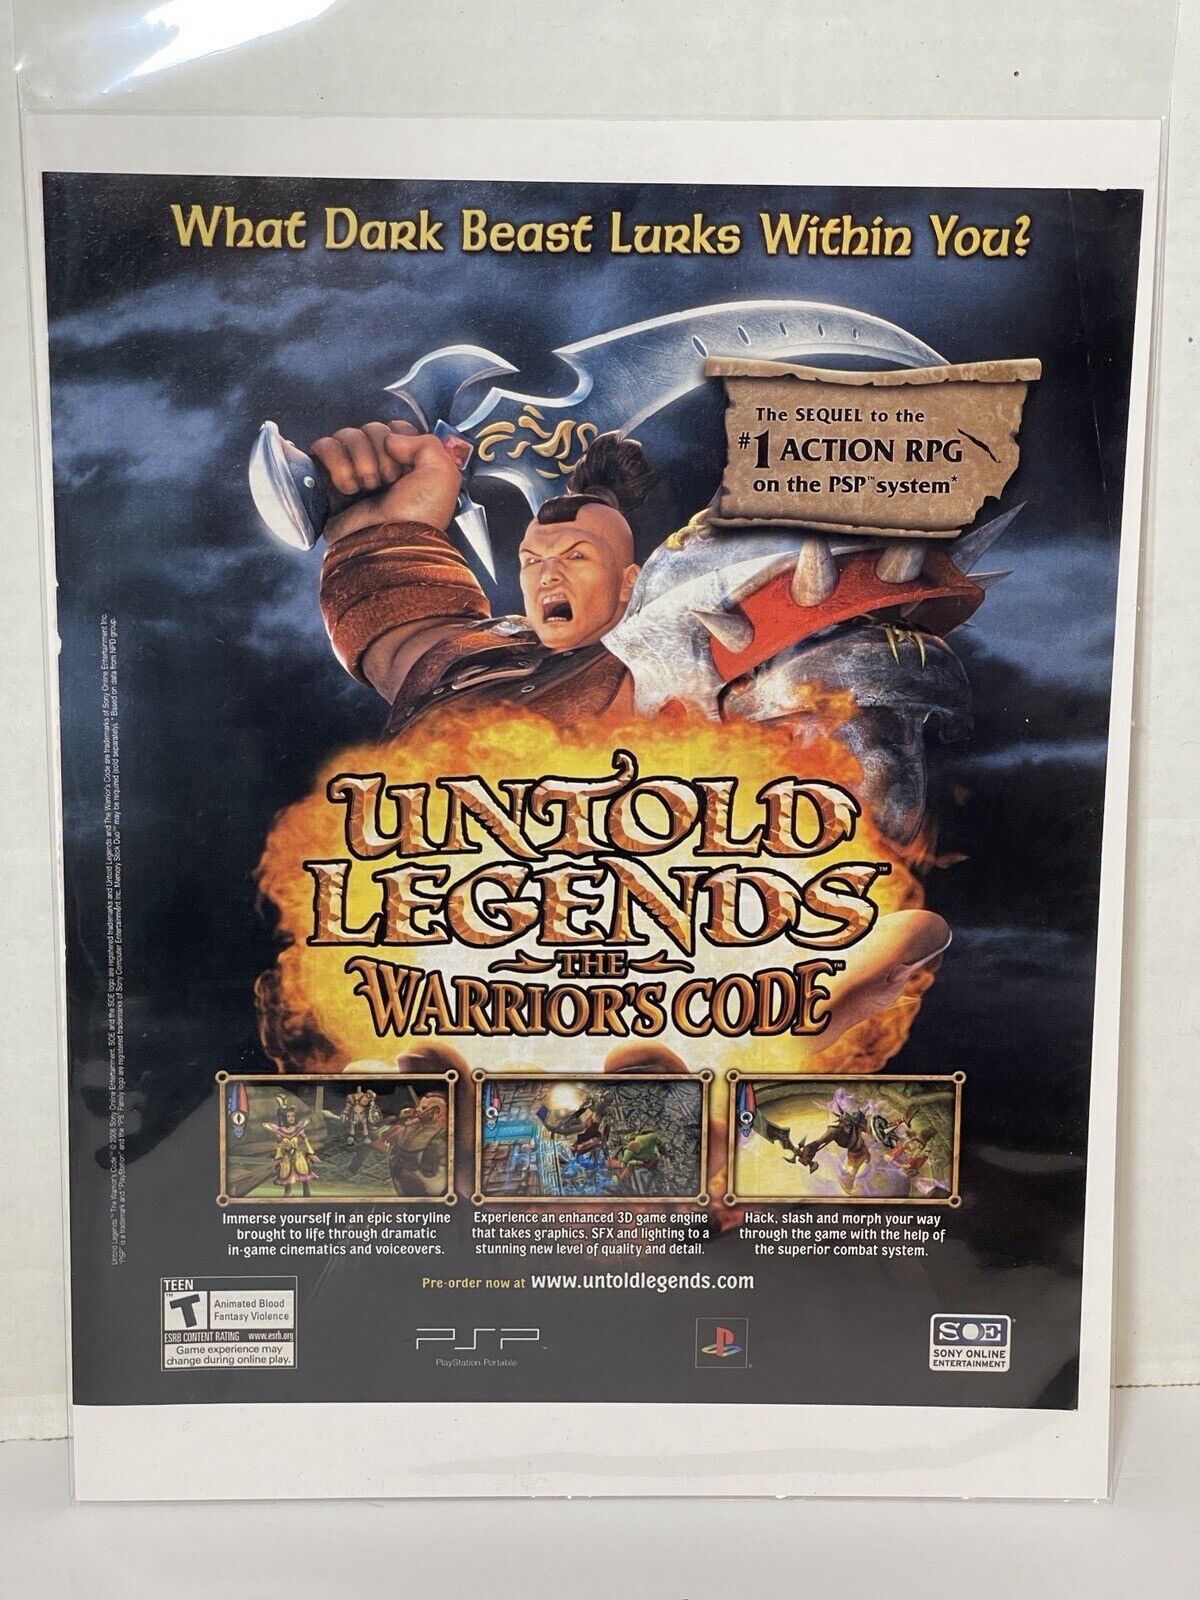 Untold Legends the Warrior's Code - Game Print Ad / Poster Promo Art 2006 B